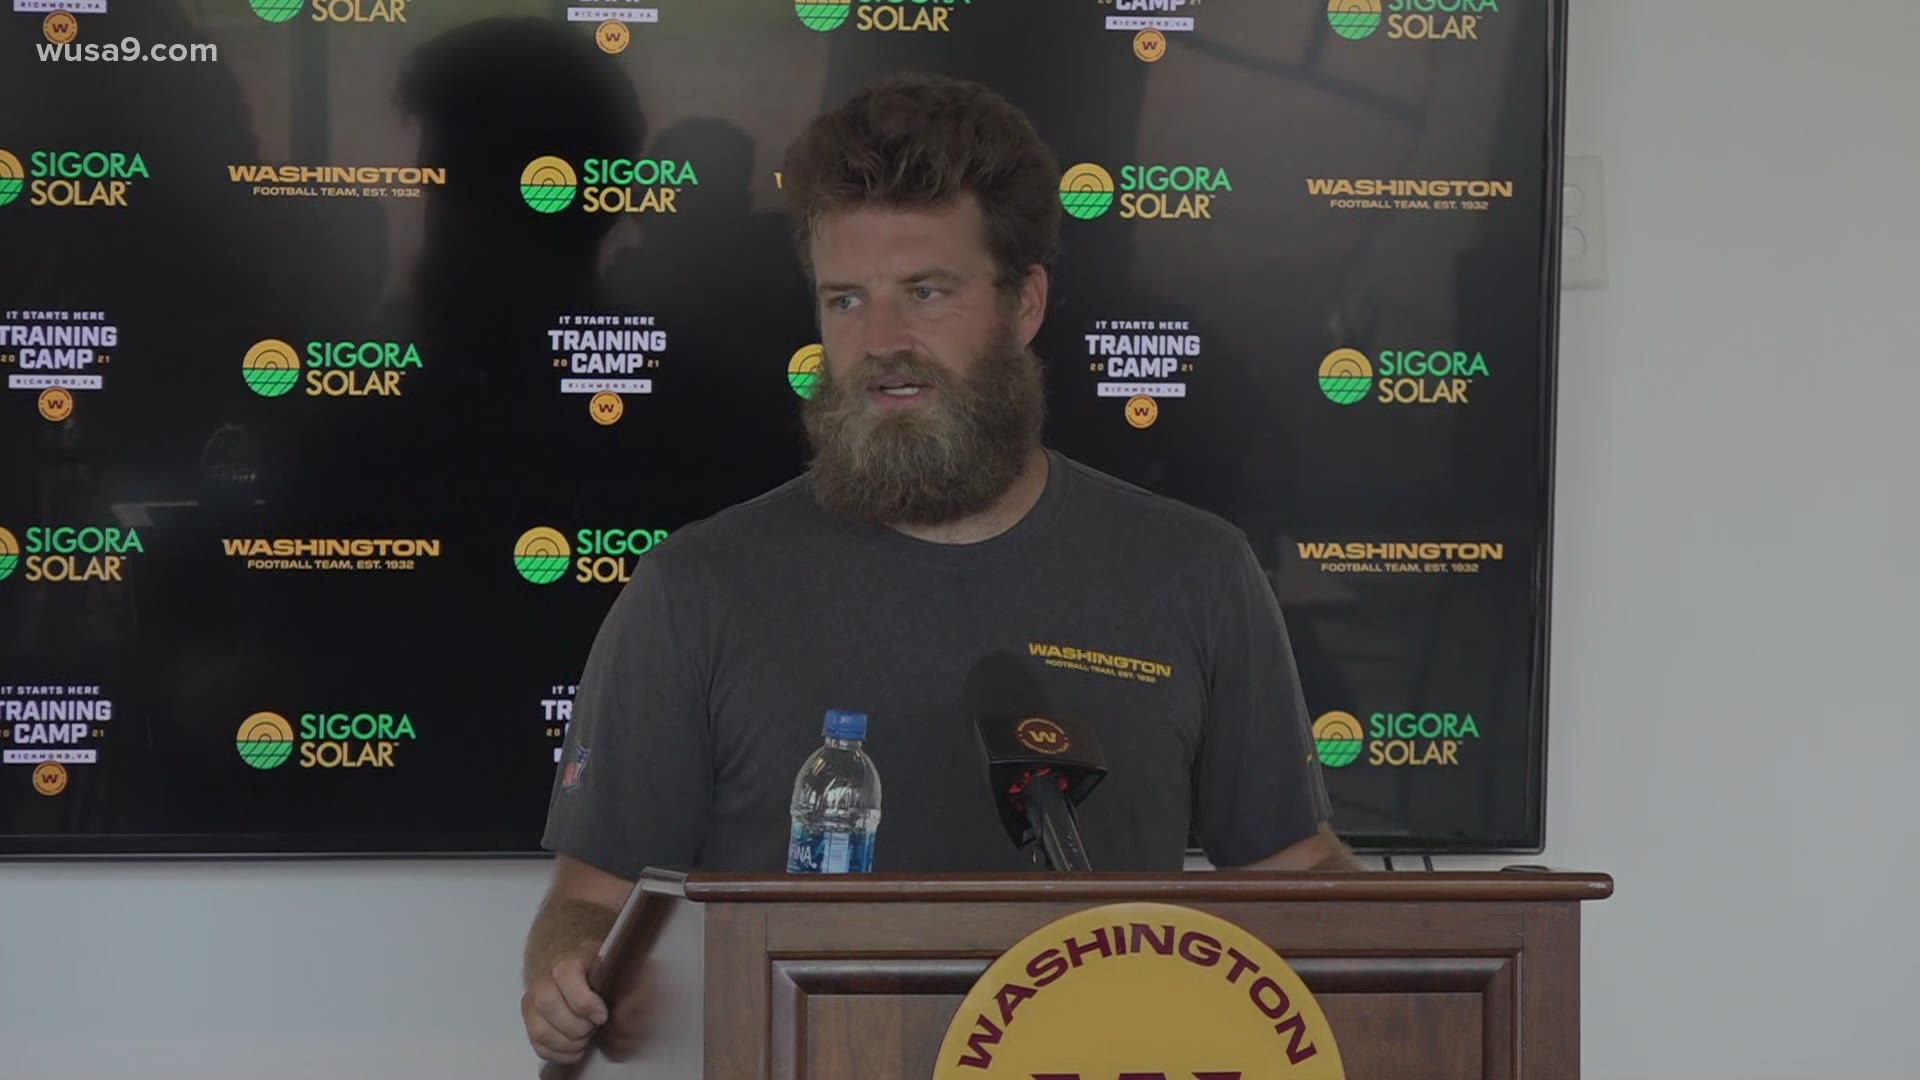 Washington quarterback Ryan Fitzpatrick fielded not only football questions in his news conference from training camp but also some about the COVID-19 vaccine.